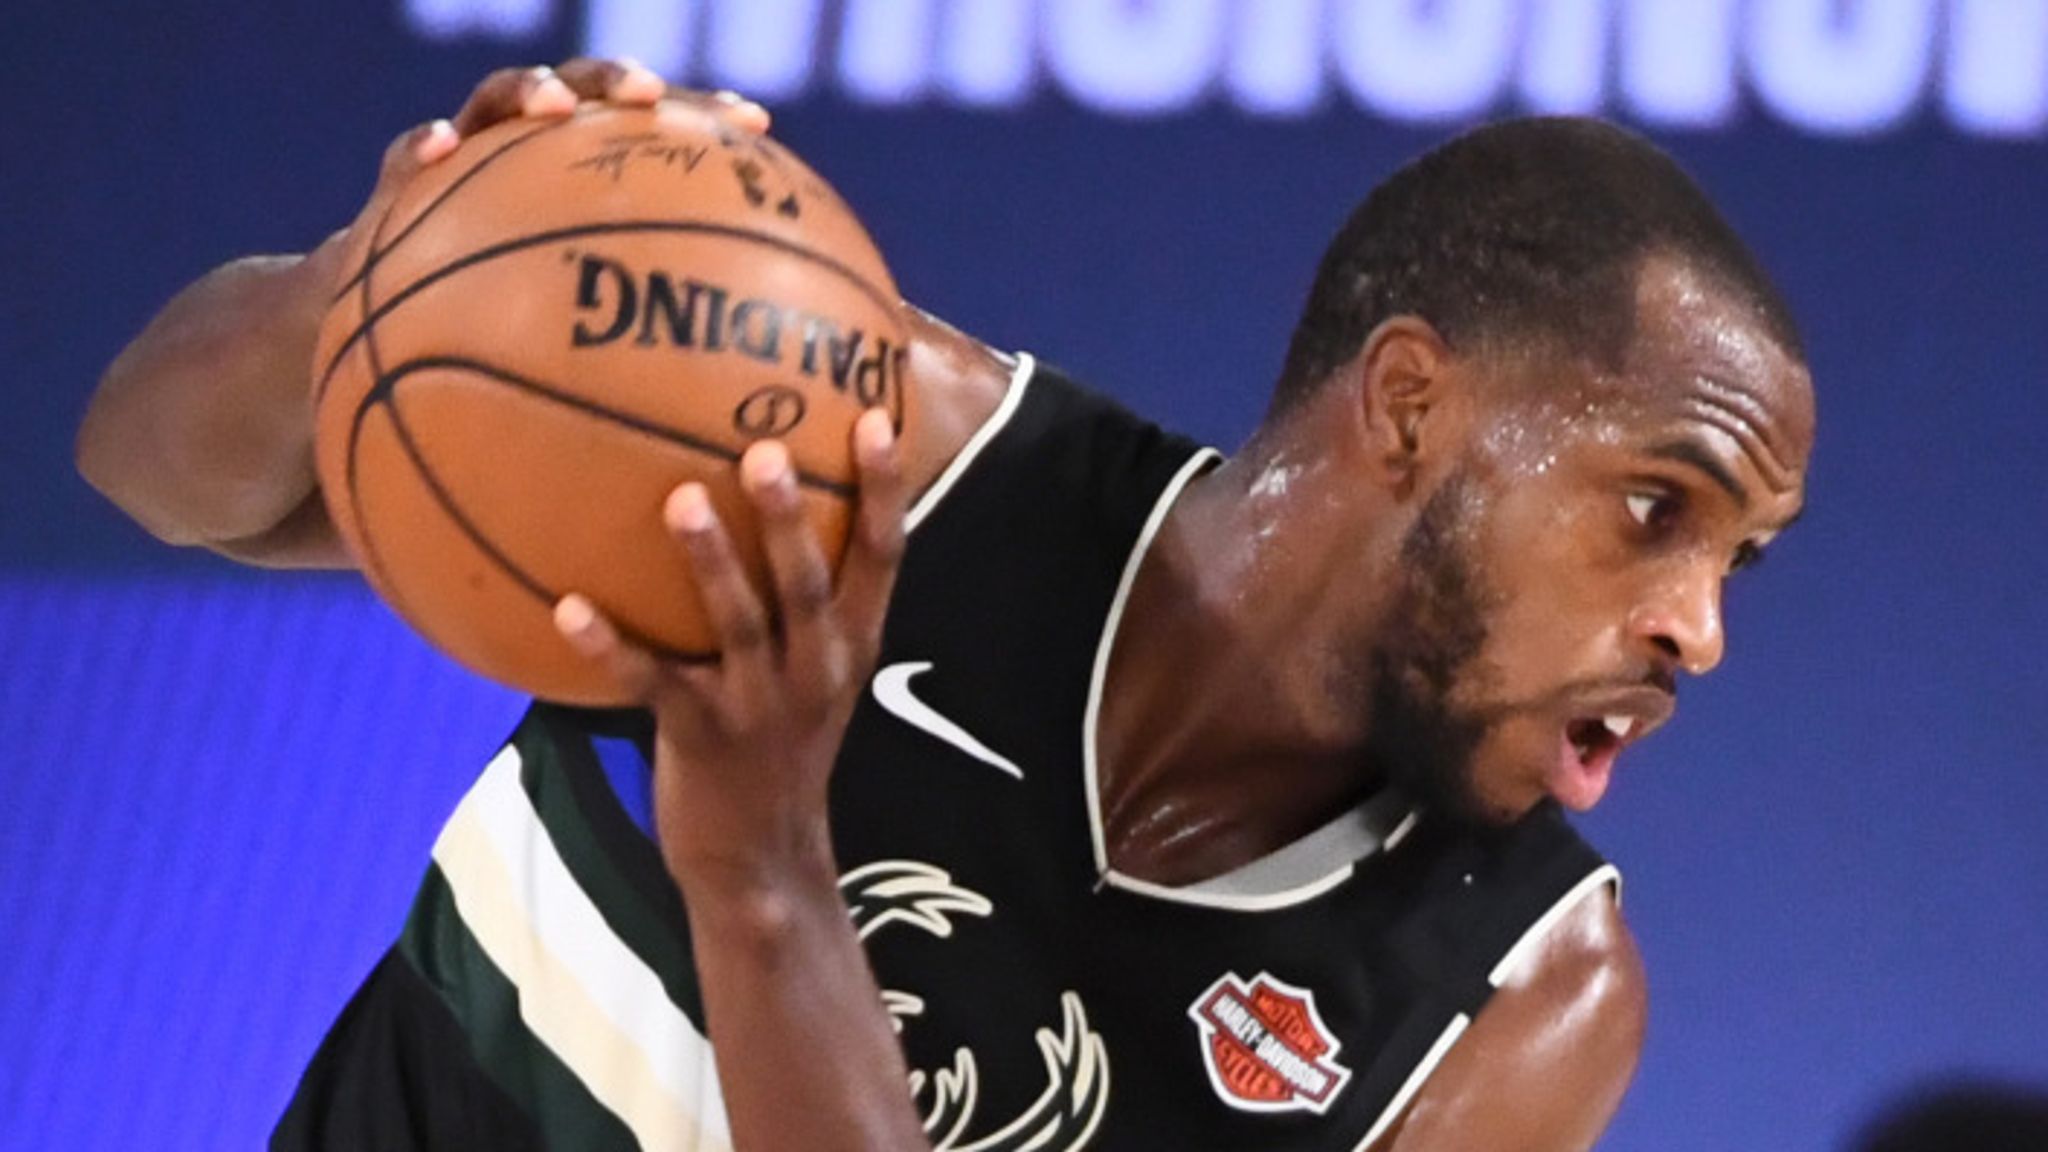 Khris Middleton S Playoff Struggles Stem From Opponent S Exploiting A Weakness In His Game Says Bj Armstrong Nba News Sky Sports